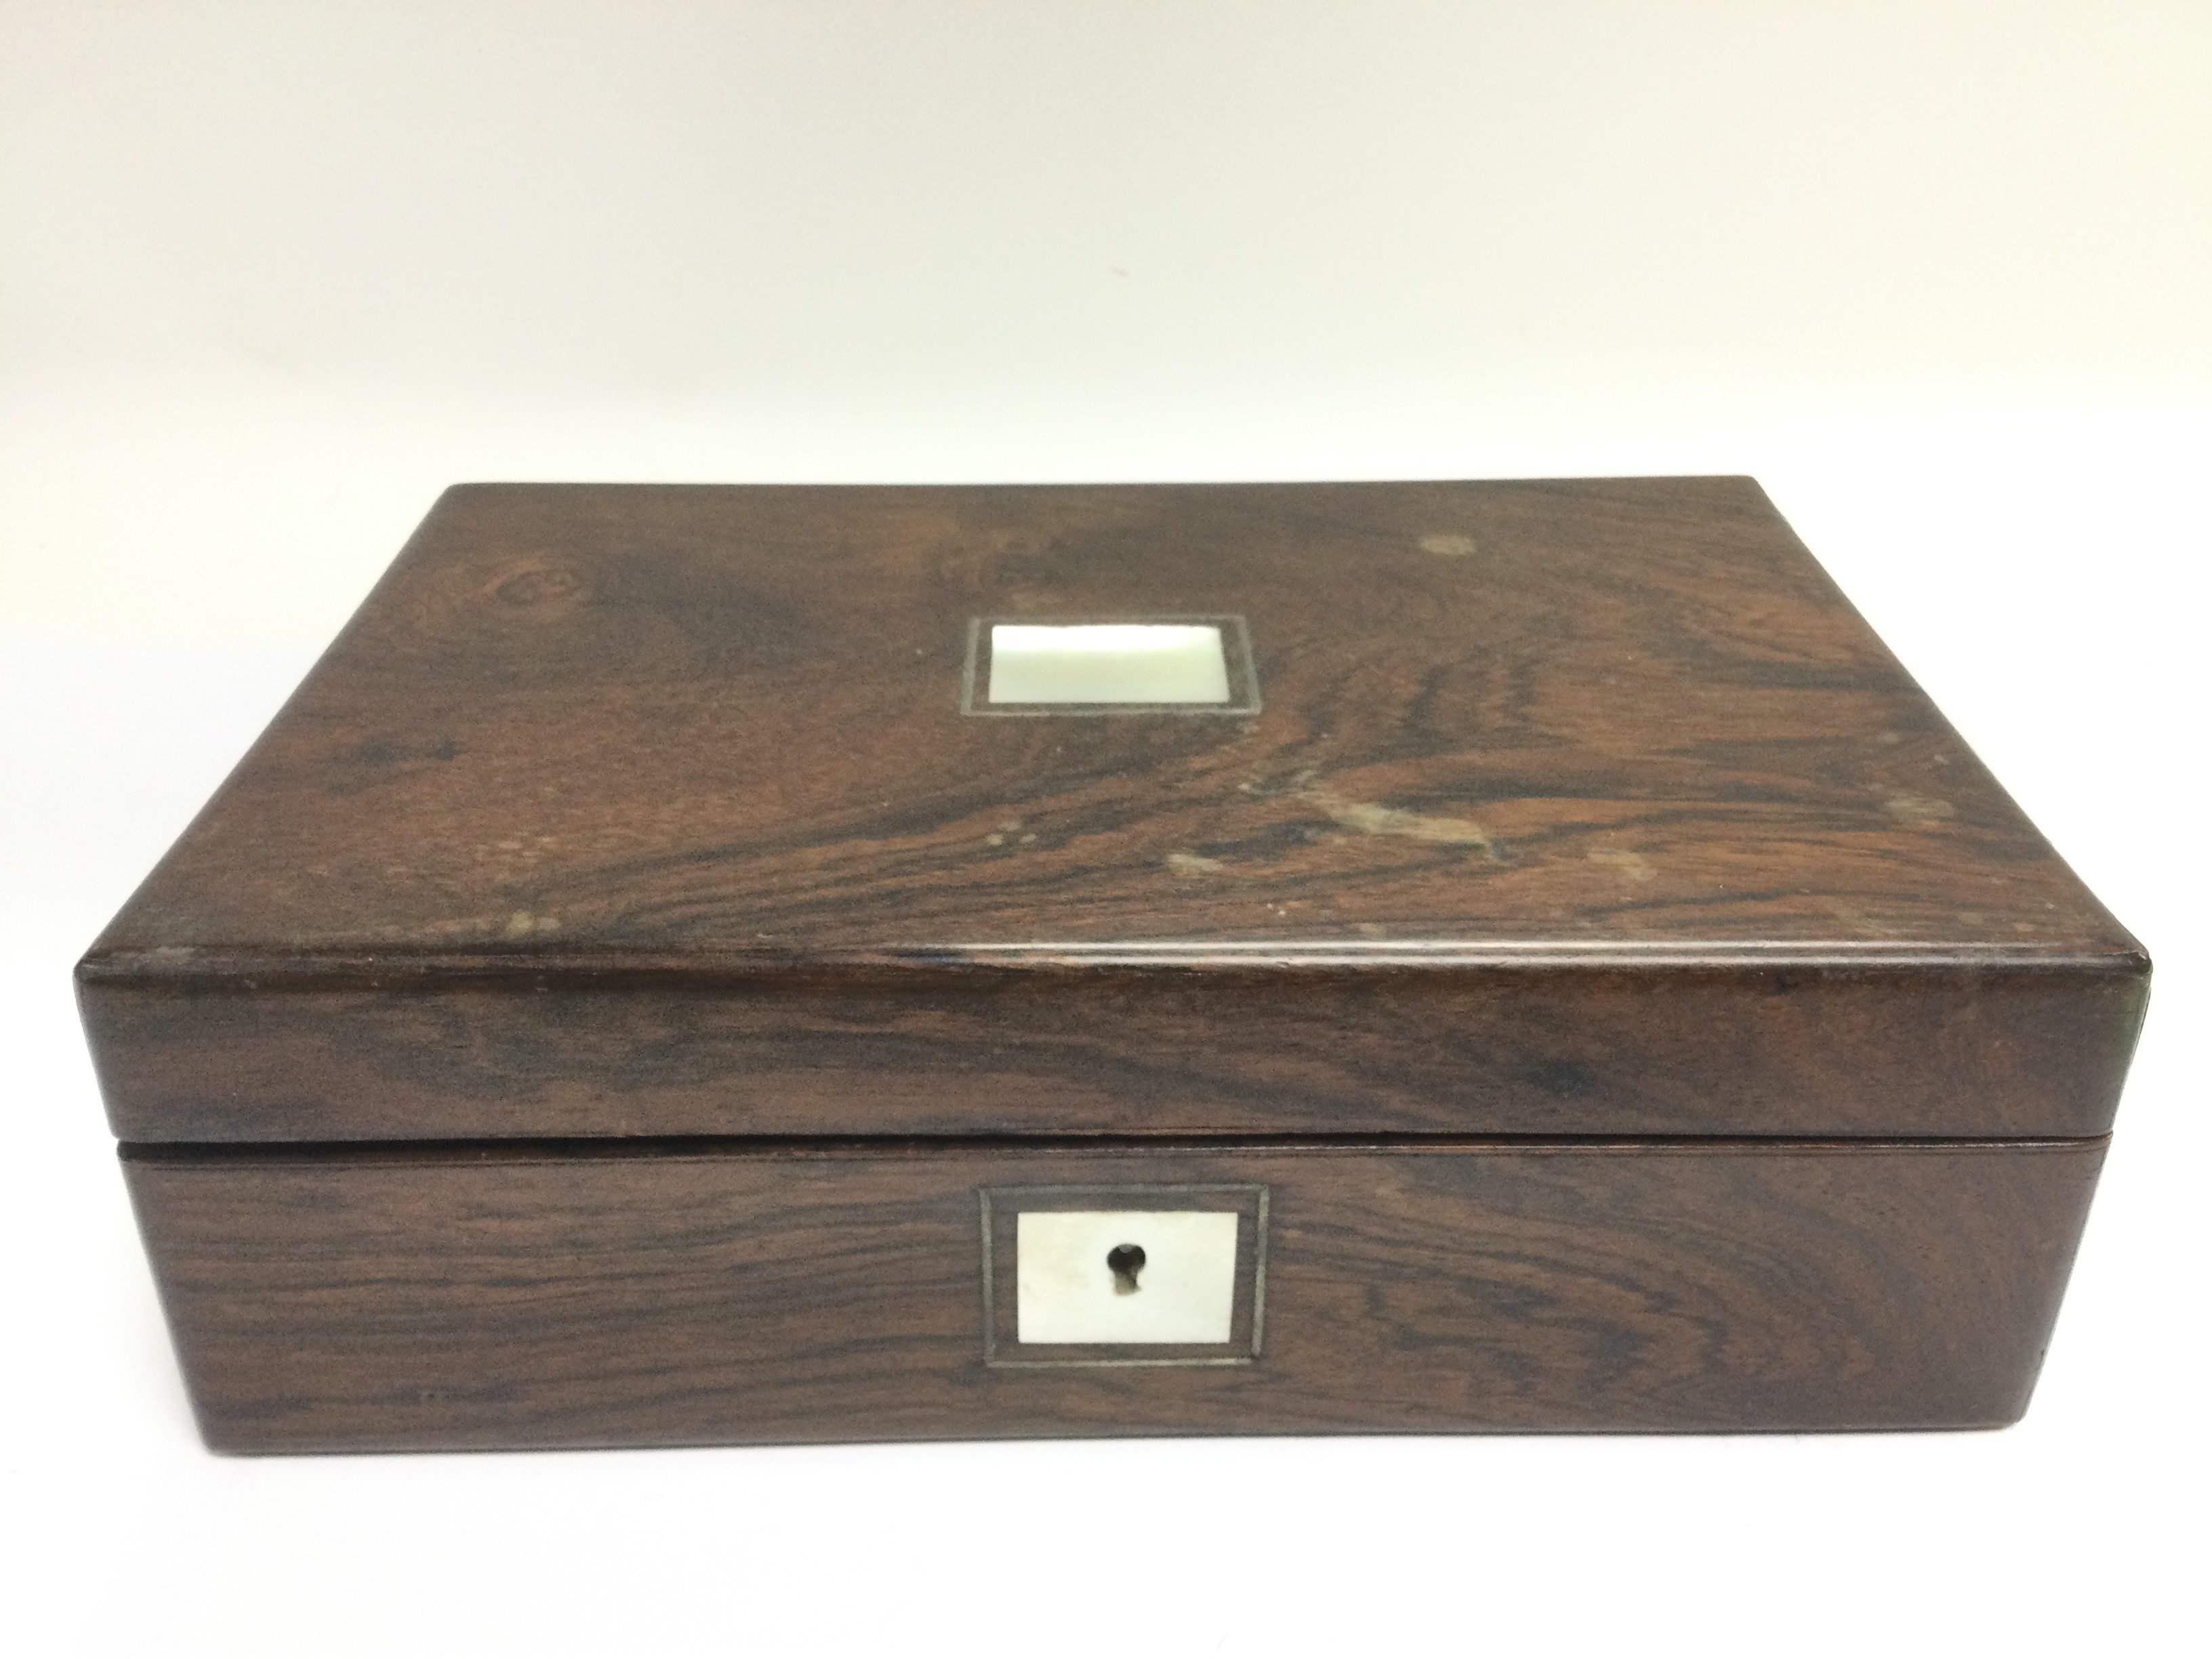 A rosewood box inset with mother of pearl. Shippin